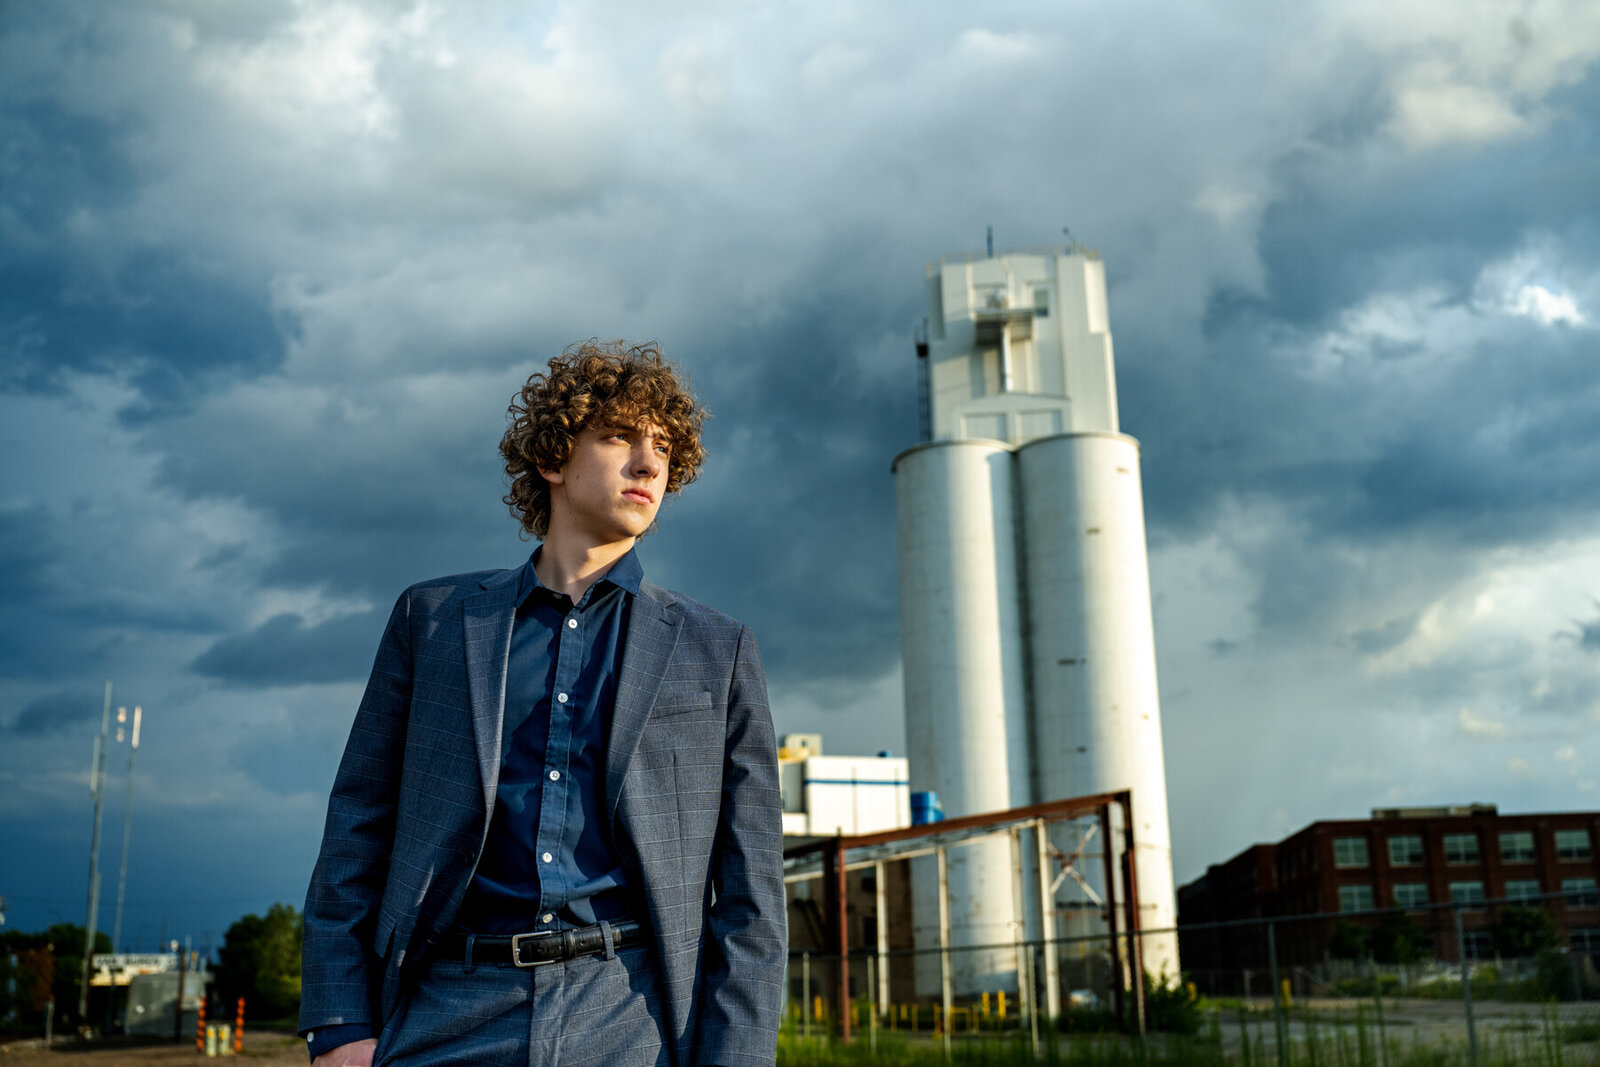 Excelsior Minnesota high school senior boy in suit in city with dramatic skies